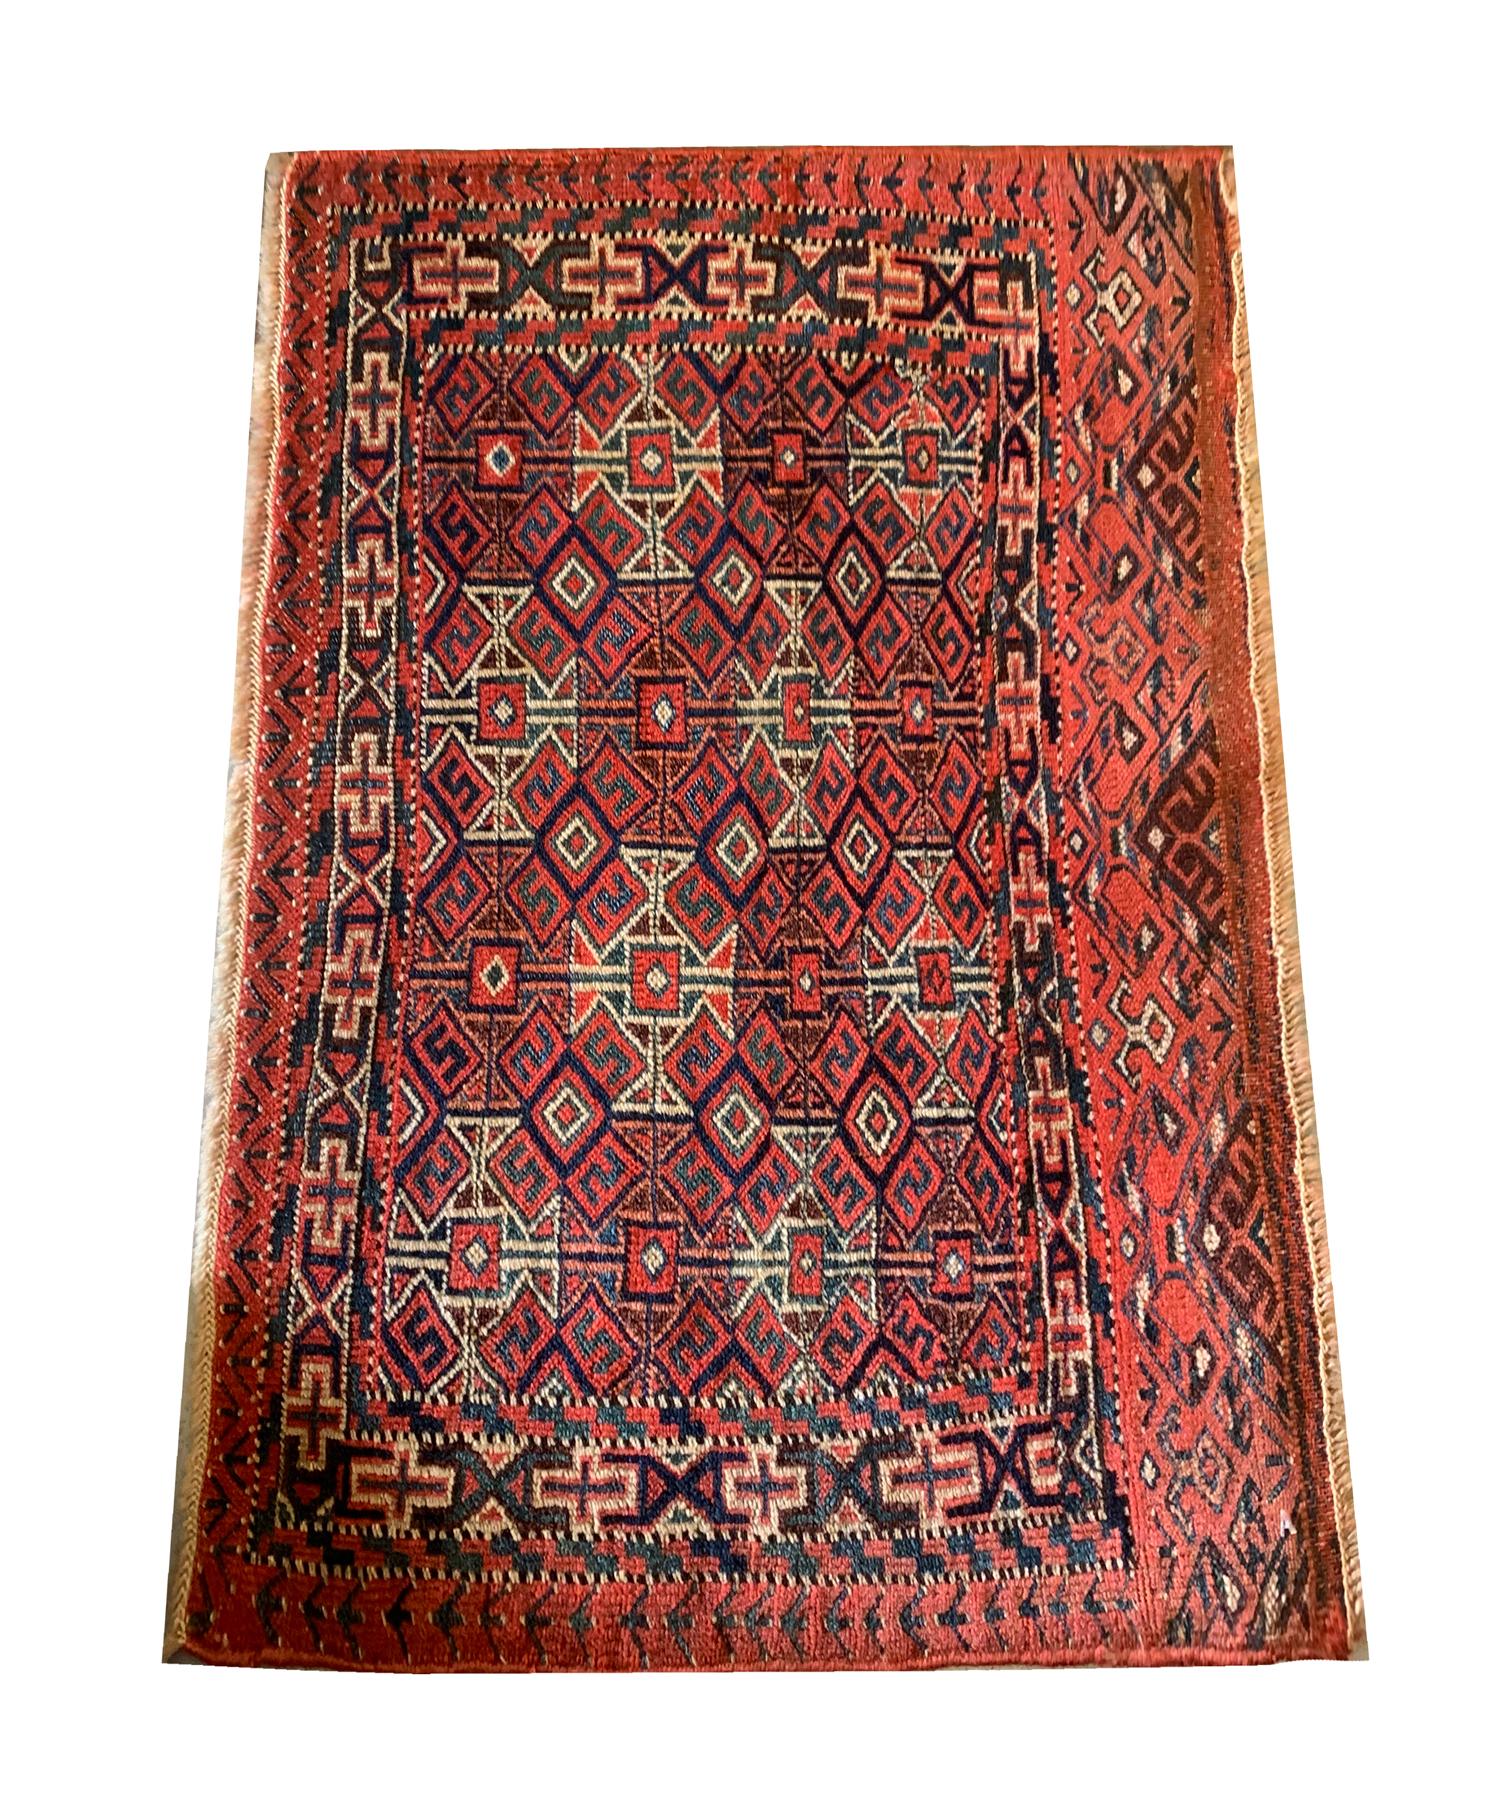 This fine wool rug was woven by hand in the 1890sTurkmens. This piece features a rich red background with brown, cream, beige and green accent colours woven in a symmetrical geometric pattern, traditional in tribal village rugs. A layered repeat